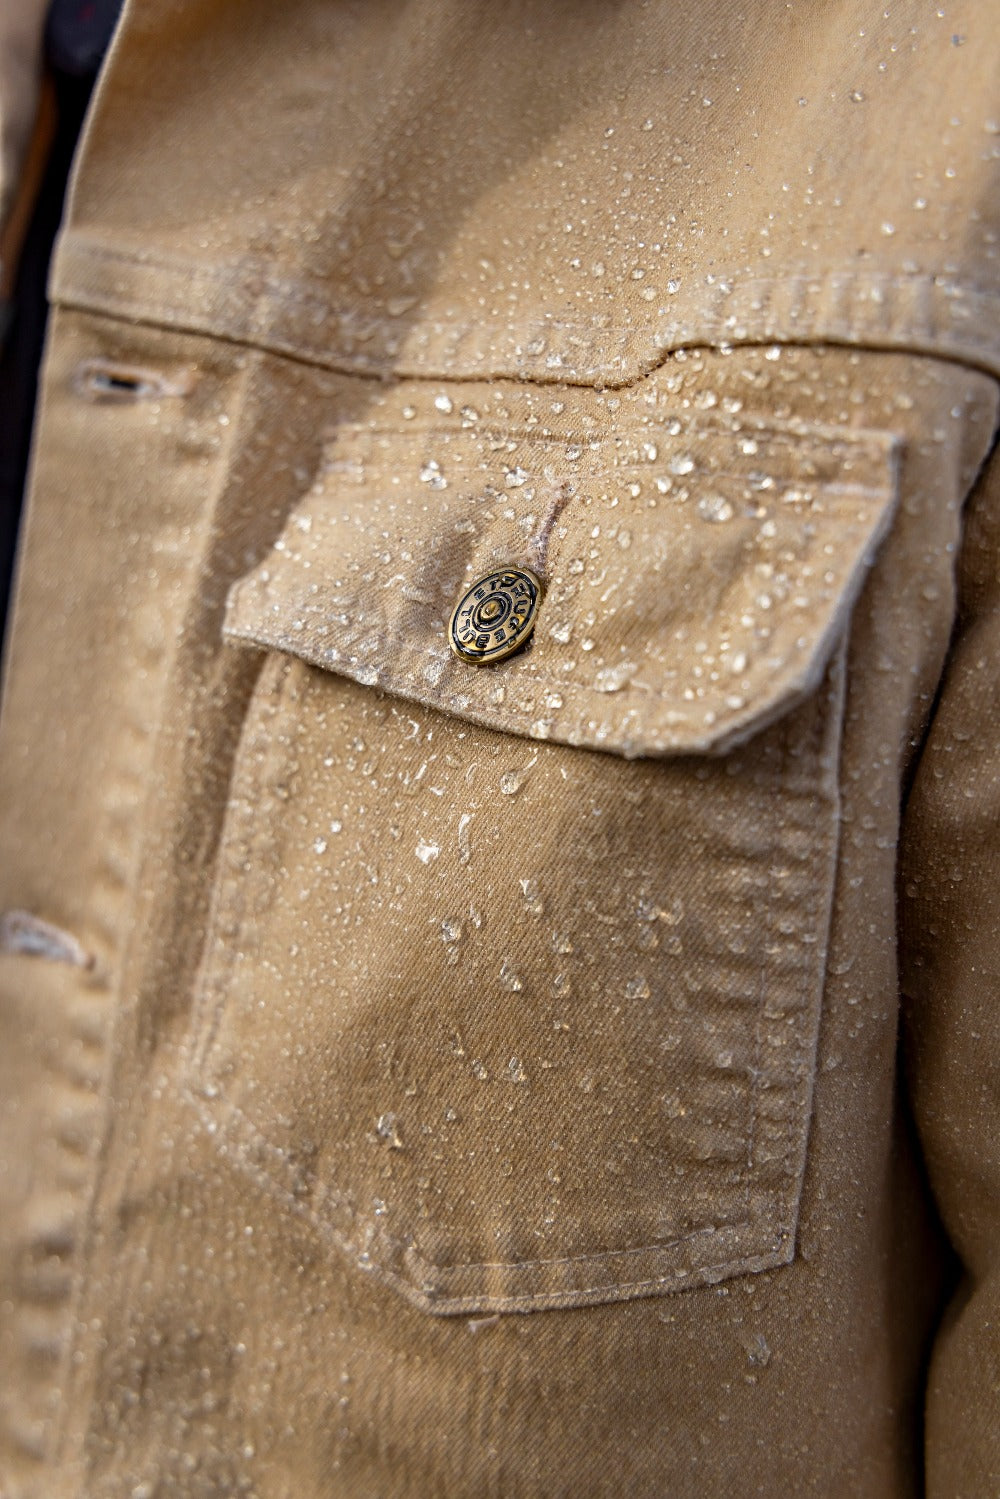 Rain droplets on the New Overland Jacket. Your trusted companion for conquering the unknown.